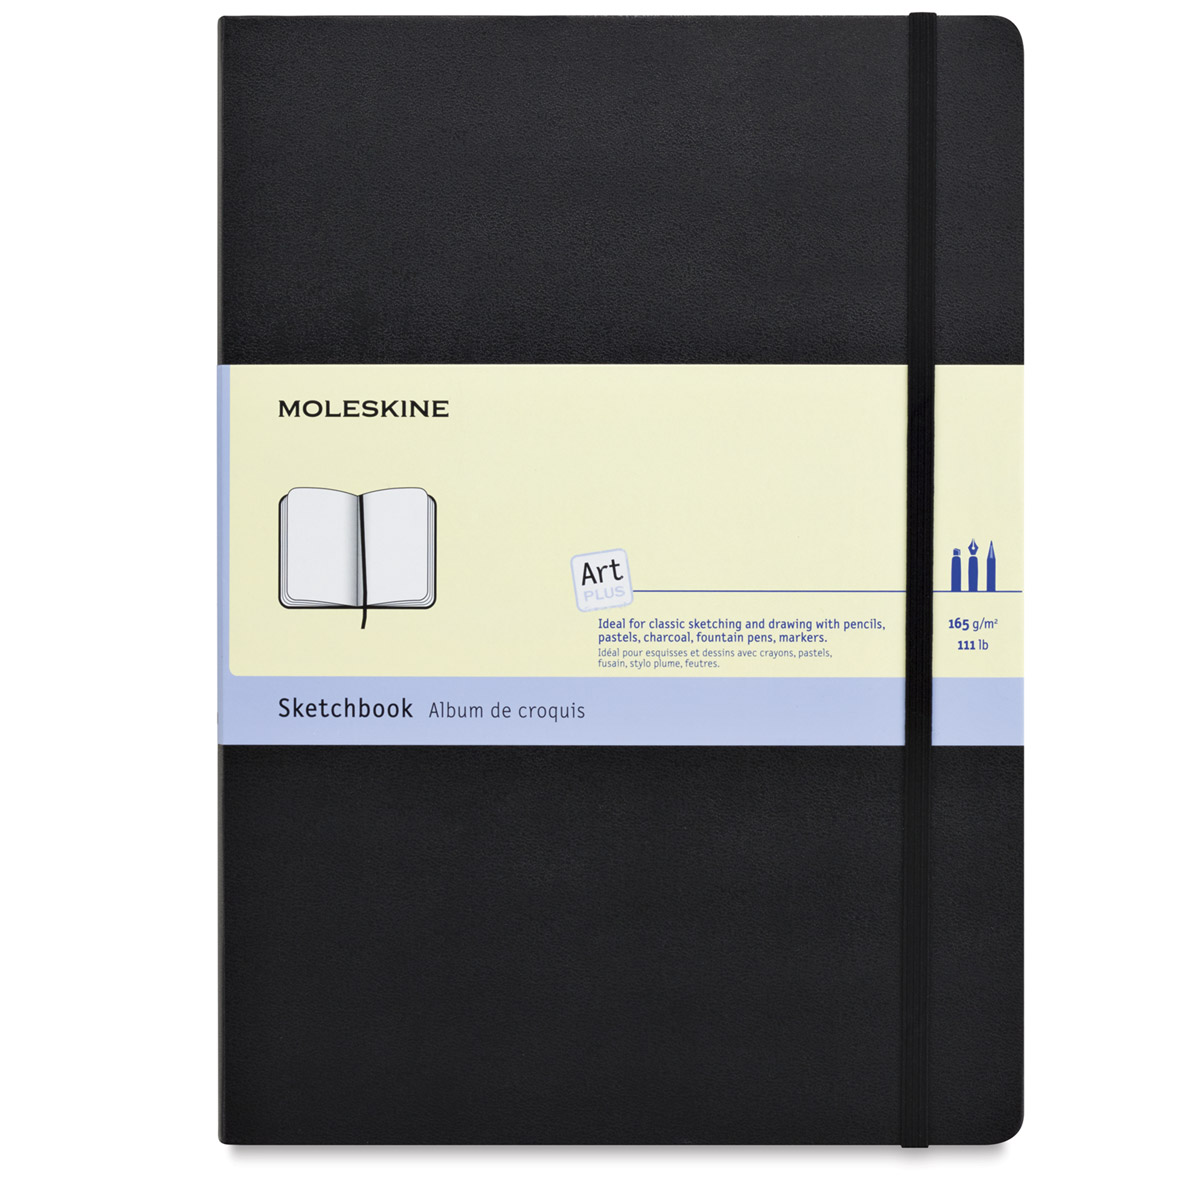 Artiste Winery - Products - Moleskine Coloring Kit and Sketching Kit